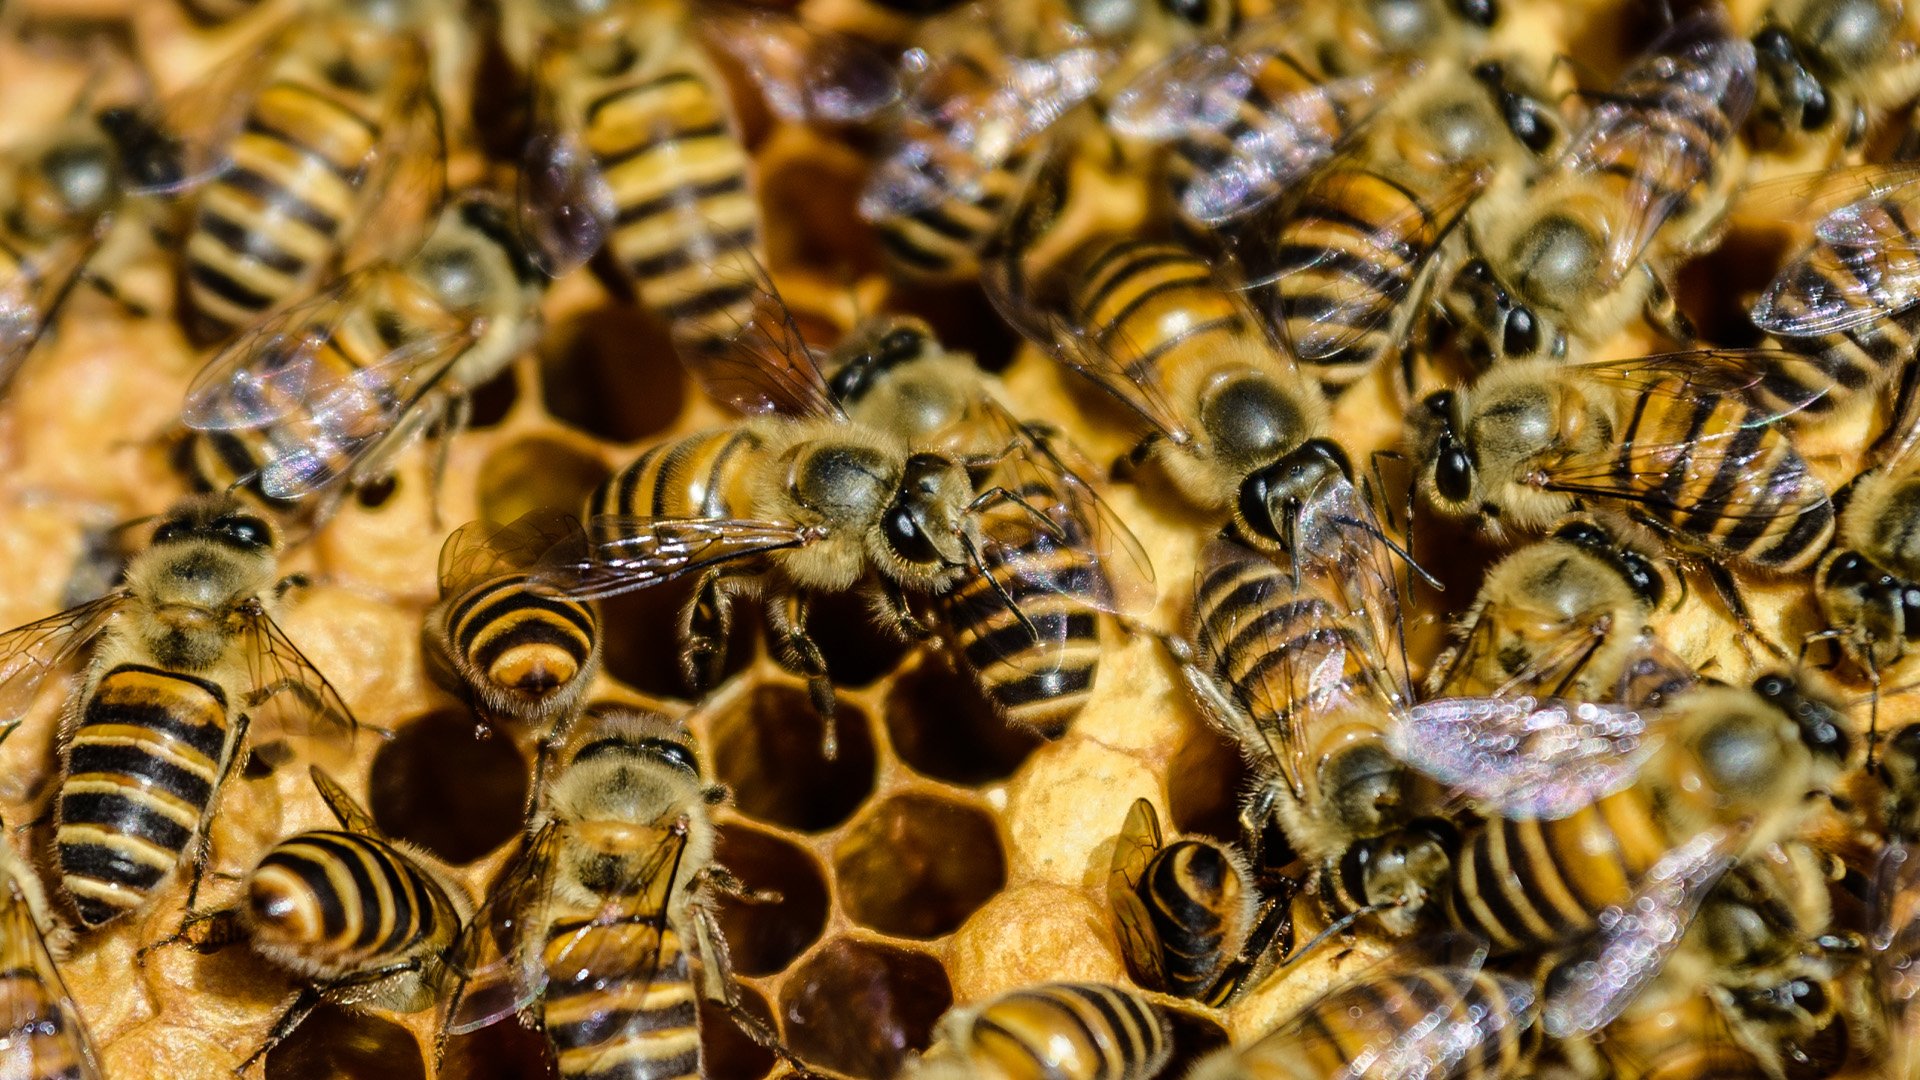 Bees are one of man's best friends, pollinating crops and producing honey, like his hive photographed on Dec.r 28, 2018, at beekeeper Yip Ki-hok's apiary in Hong Kong. But bee stings also can kill people. Photo by Anthony Wallace/AFP via Getty Images.